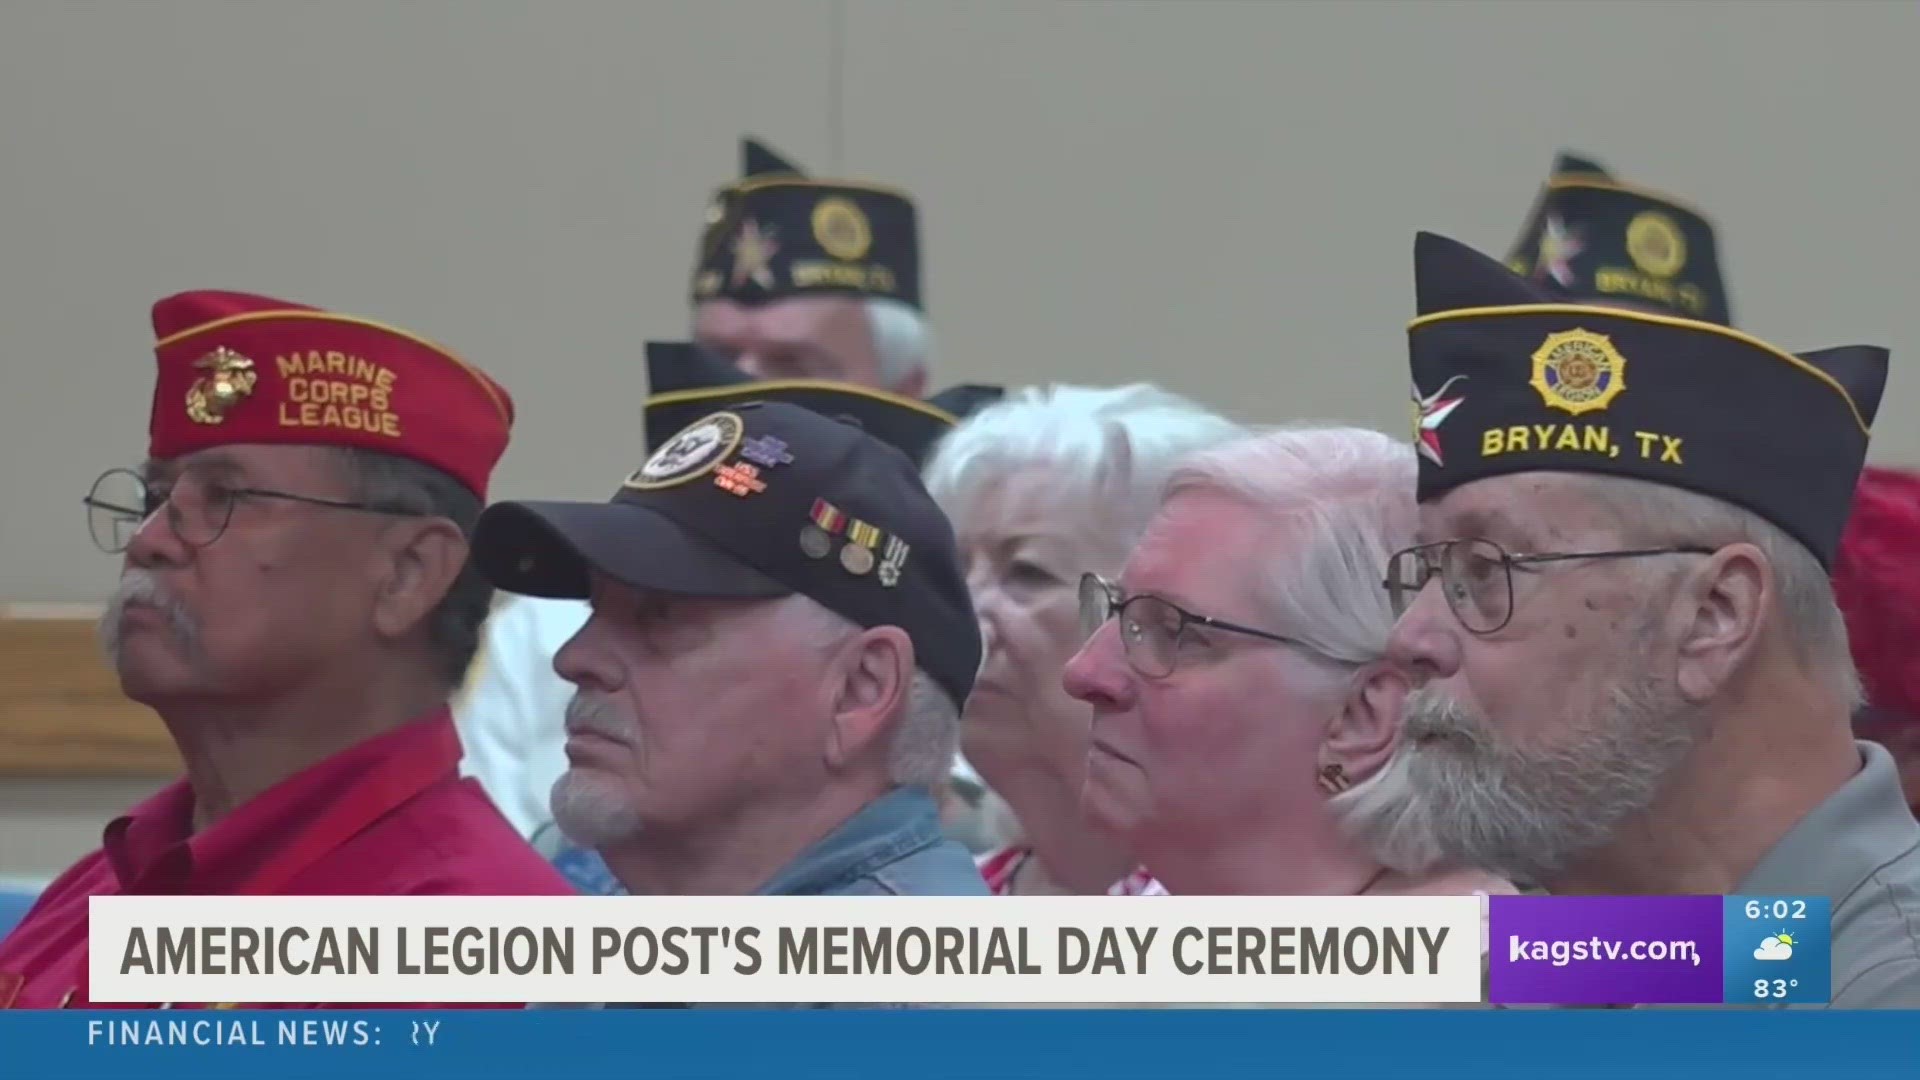 "Even if you're not in the military, or none of your family members were, it still affects you because it keeps our country free," said Commander Dale Hutchcraft.